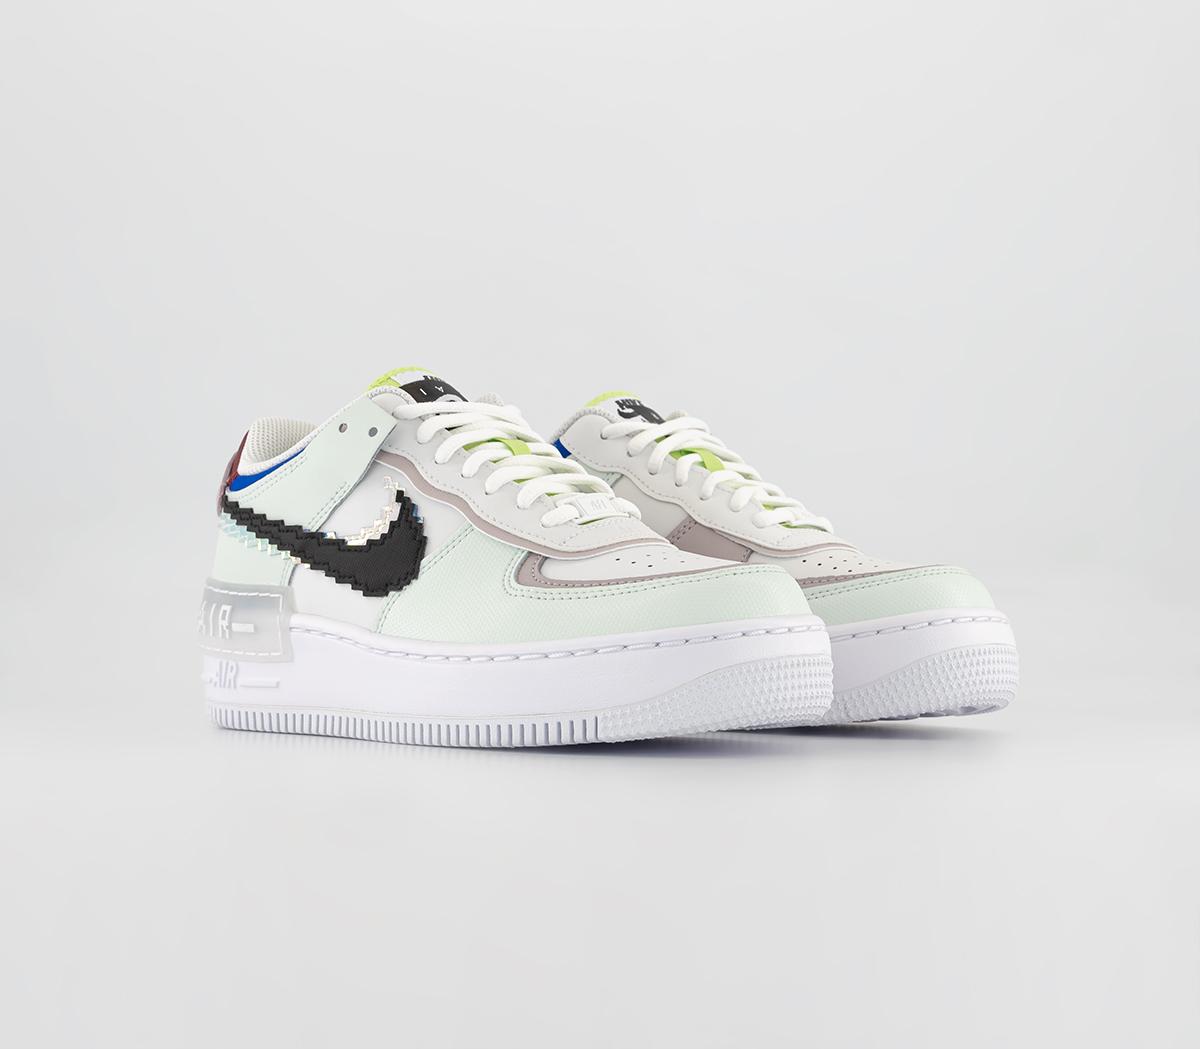 Nike Womens Air Force 1 Shadow Trainers Barely Green Black White Platinum Violet, 5